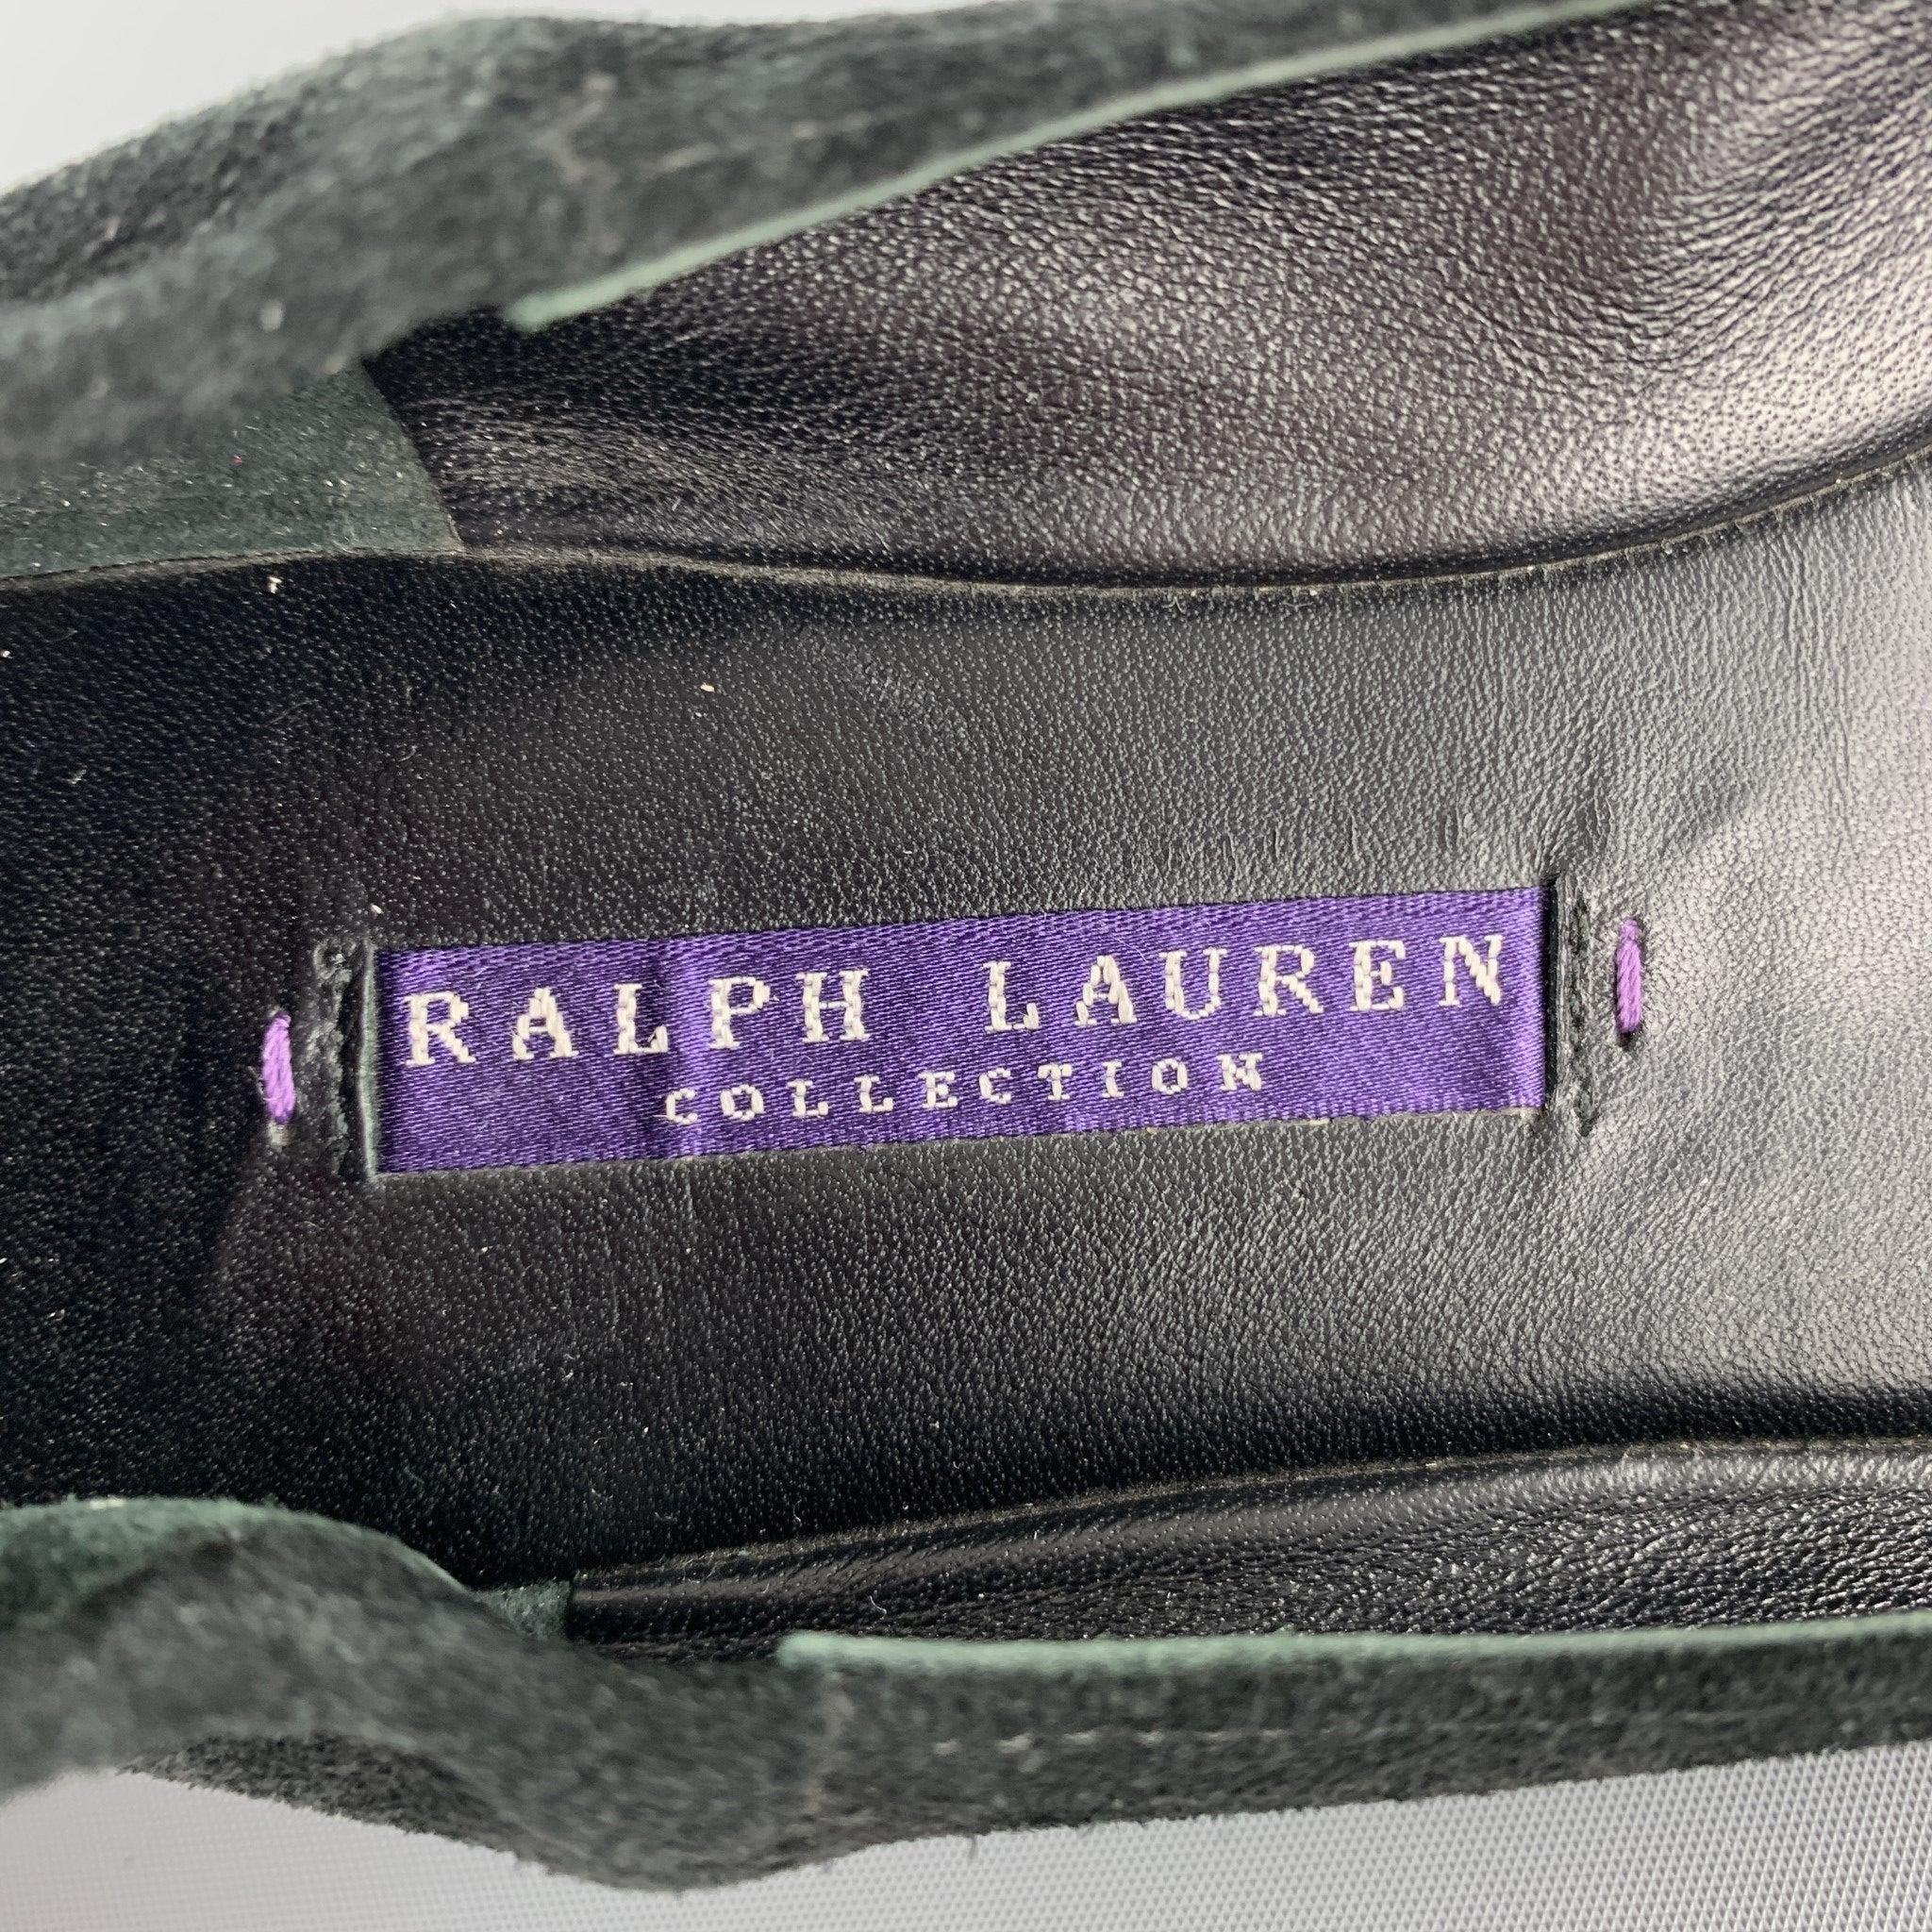 RALPH LAUREN COLLECTION Size 7 Black Suede Bow Flats For Sale 2